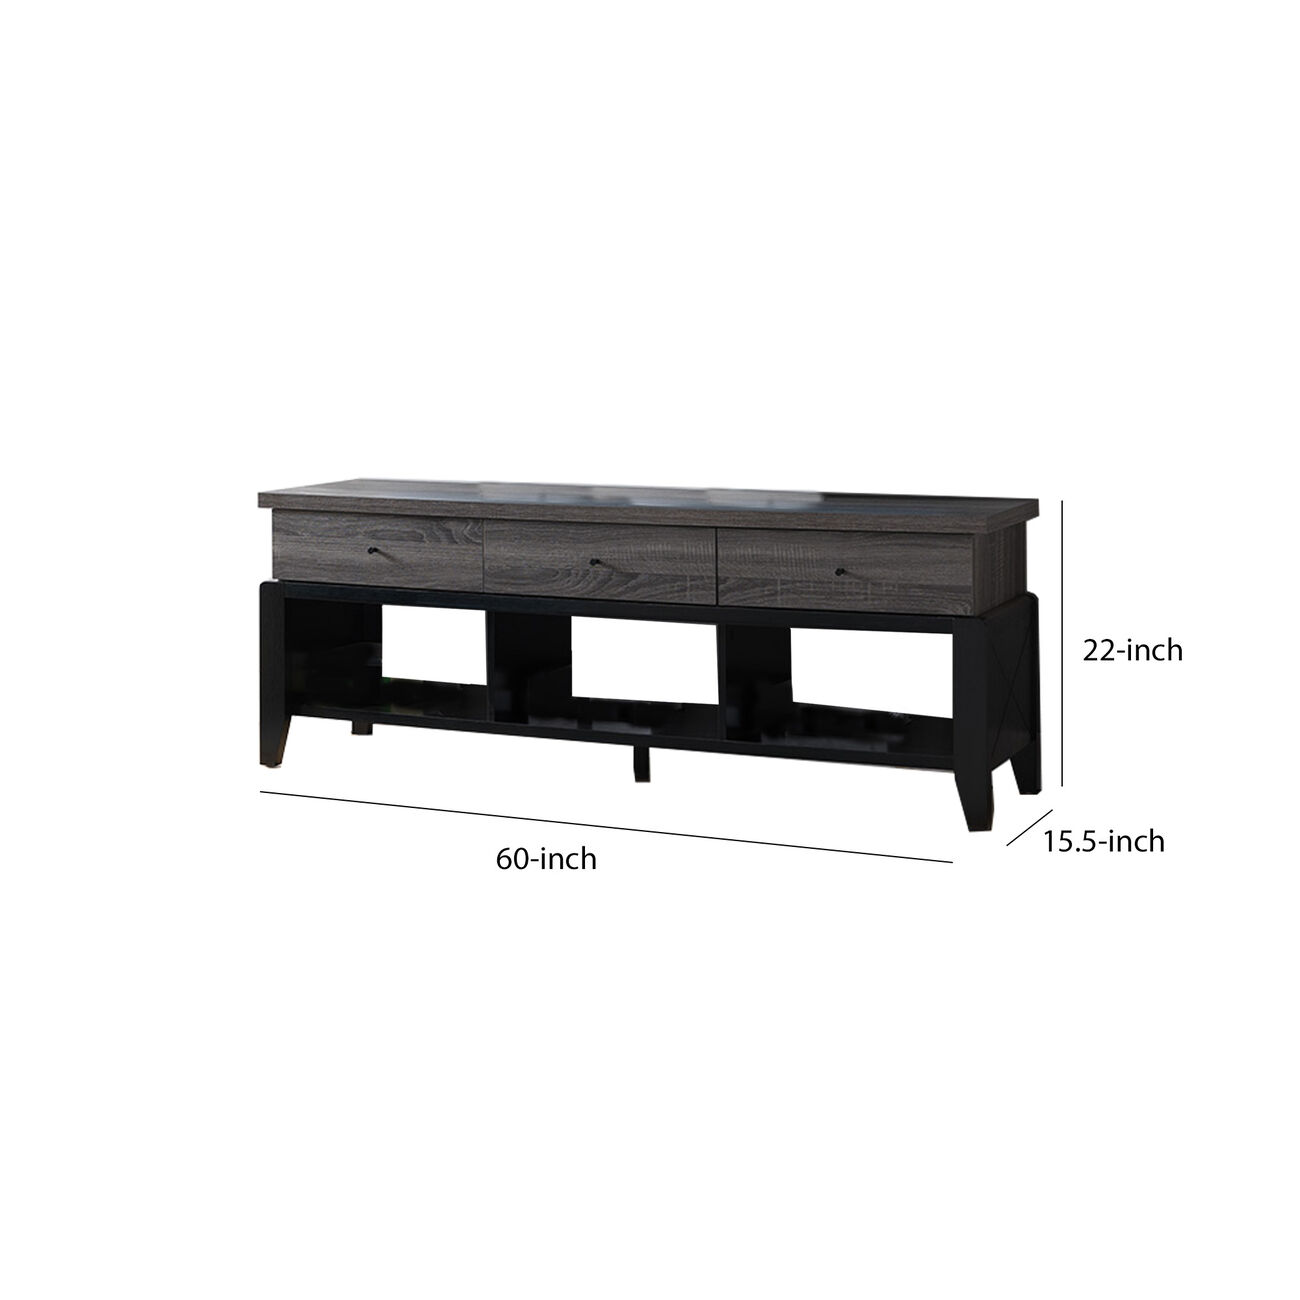 Wooden Frame TV Stand with 3 Drawers and 3 Open Compartments,Gray and Black